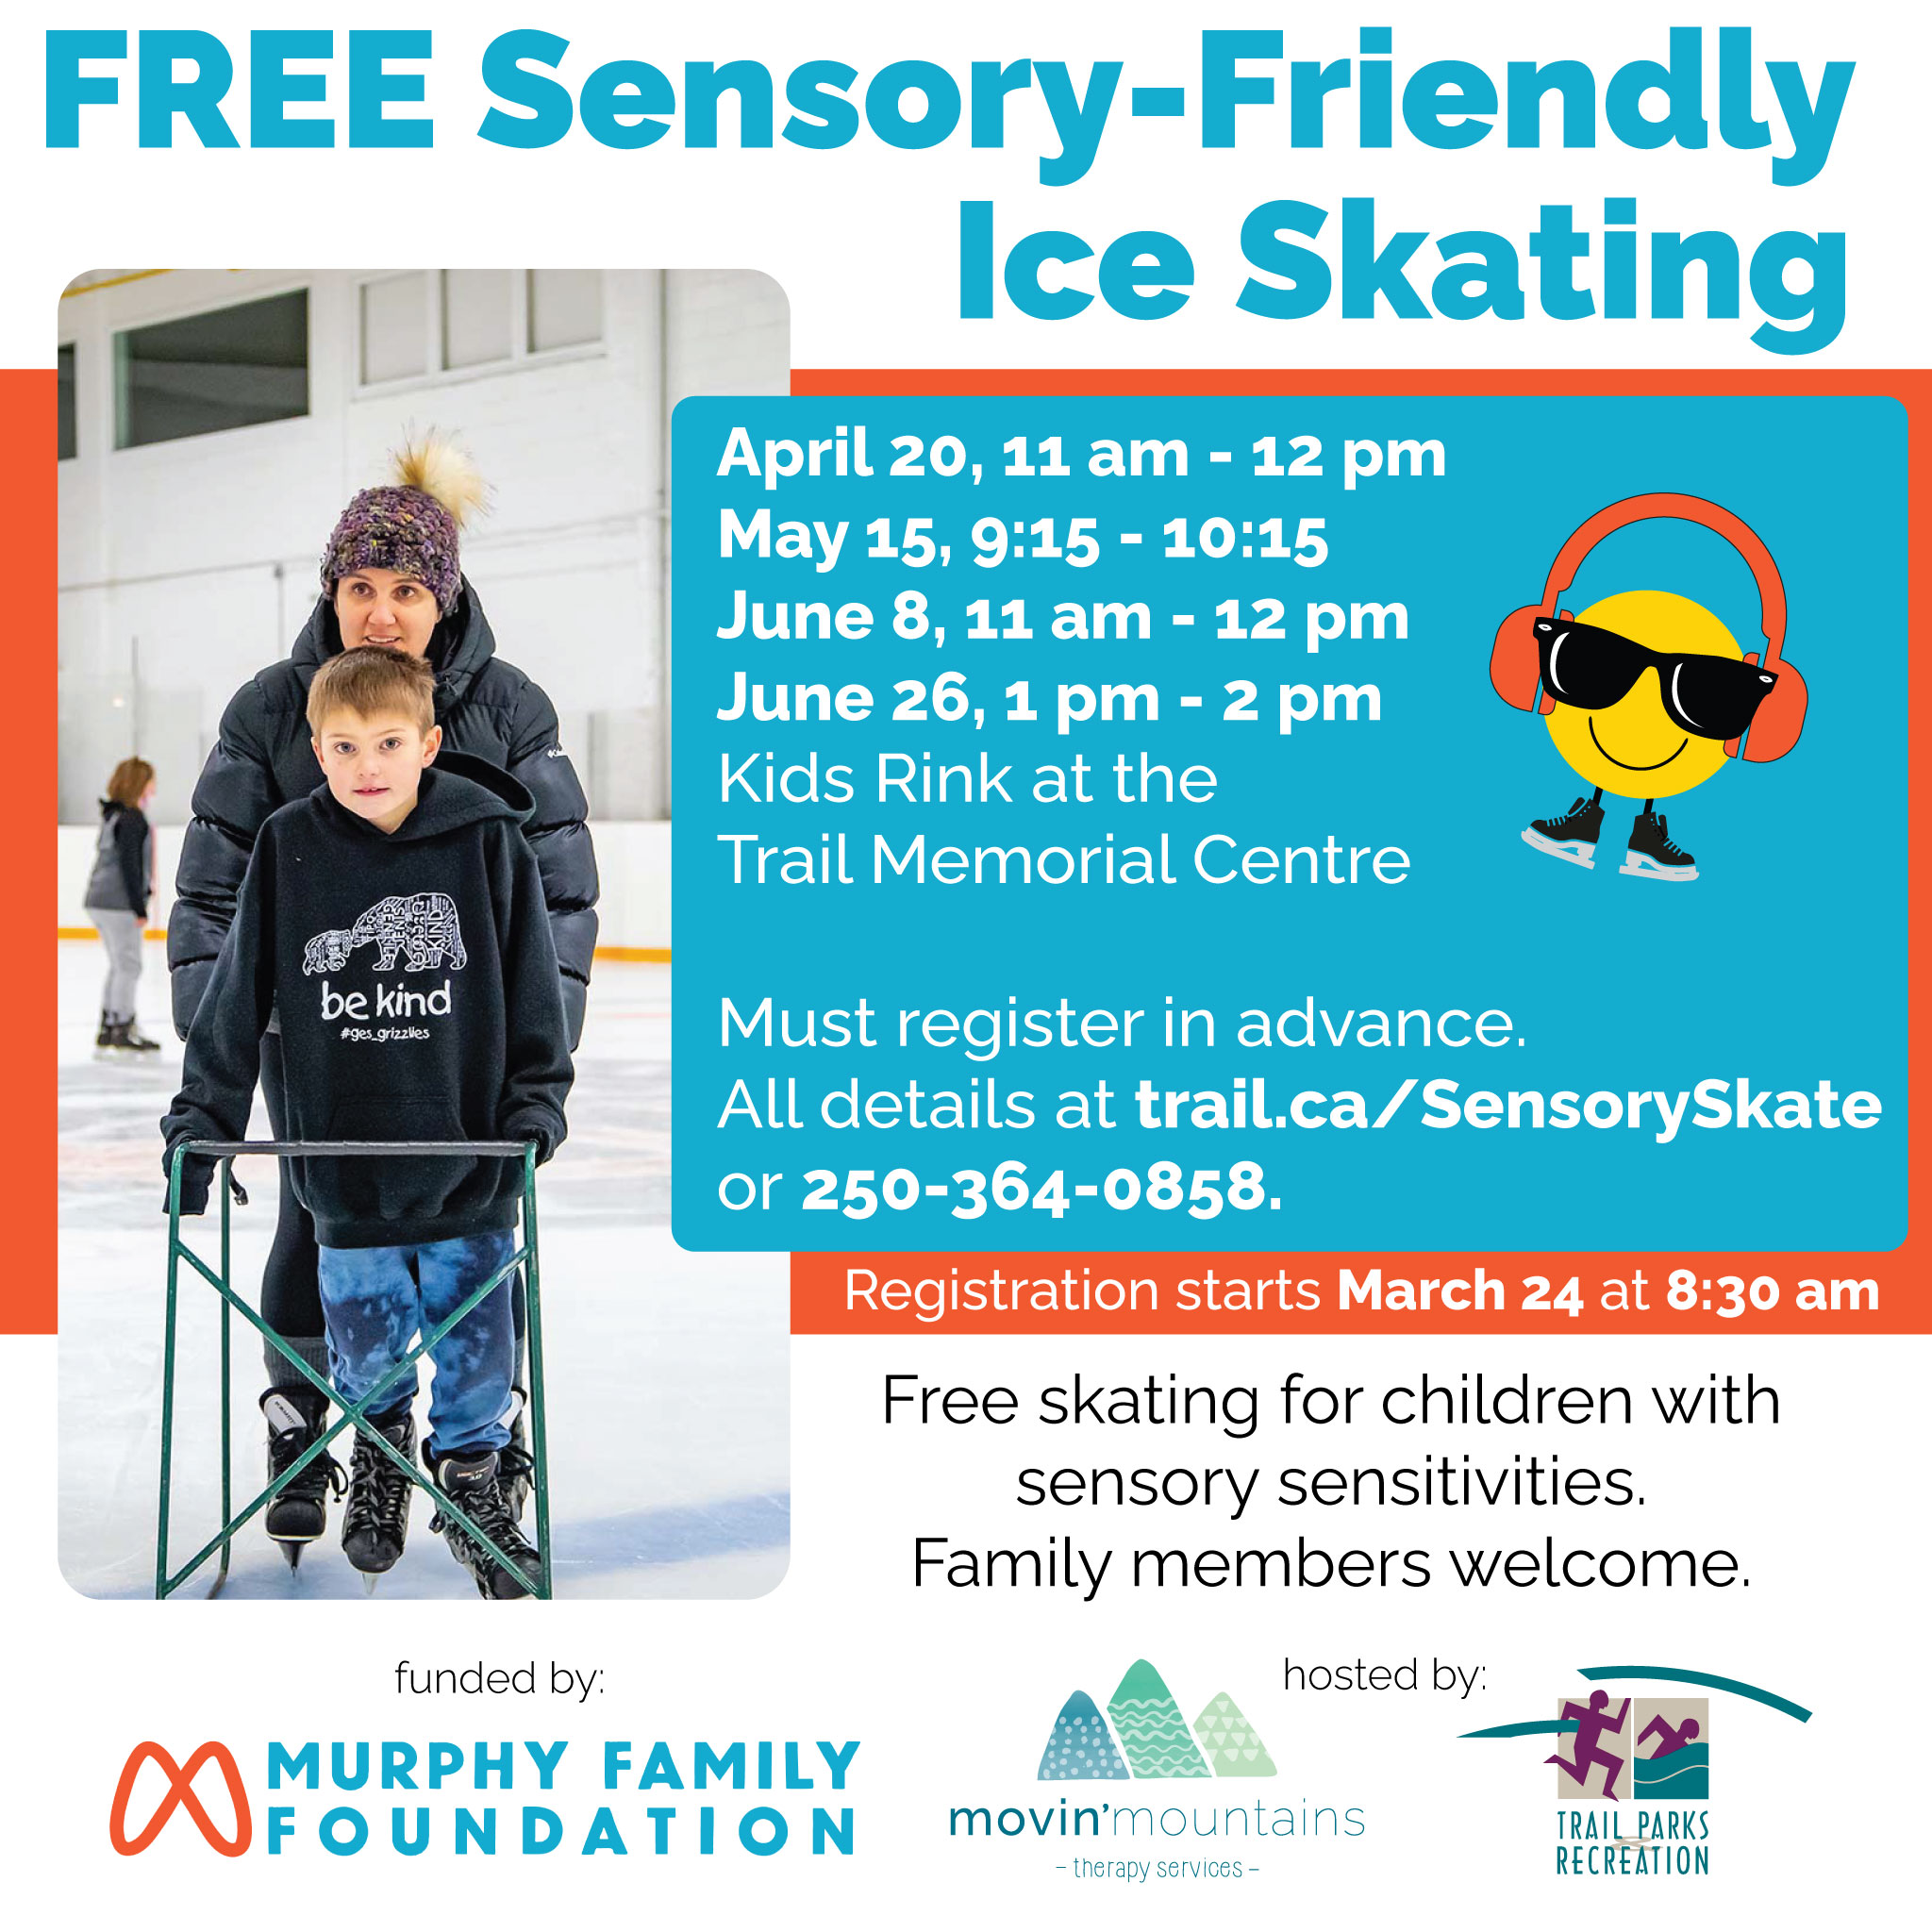 Free sensory-friendly ice skating coming to the Kids Rink at the Trail Memorial Centre